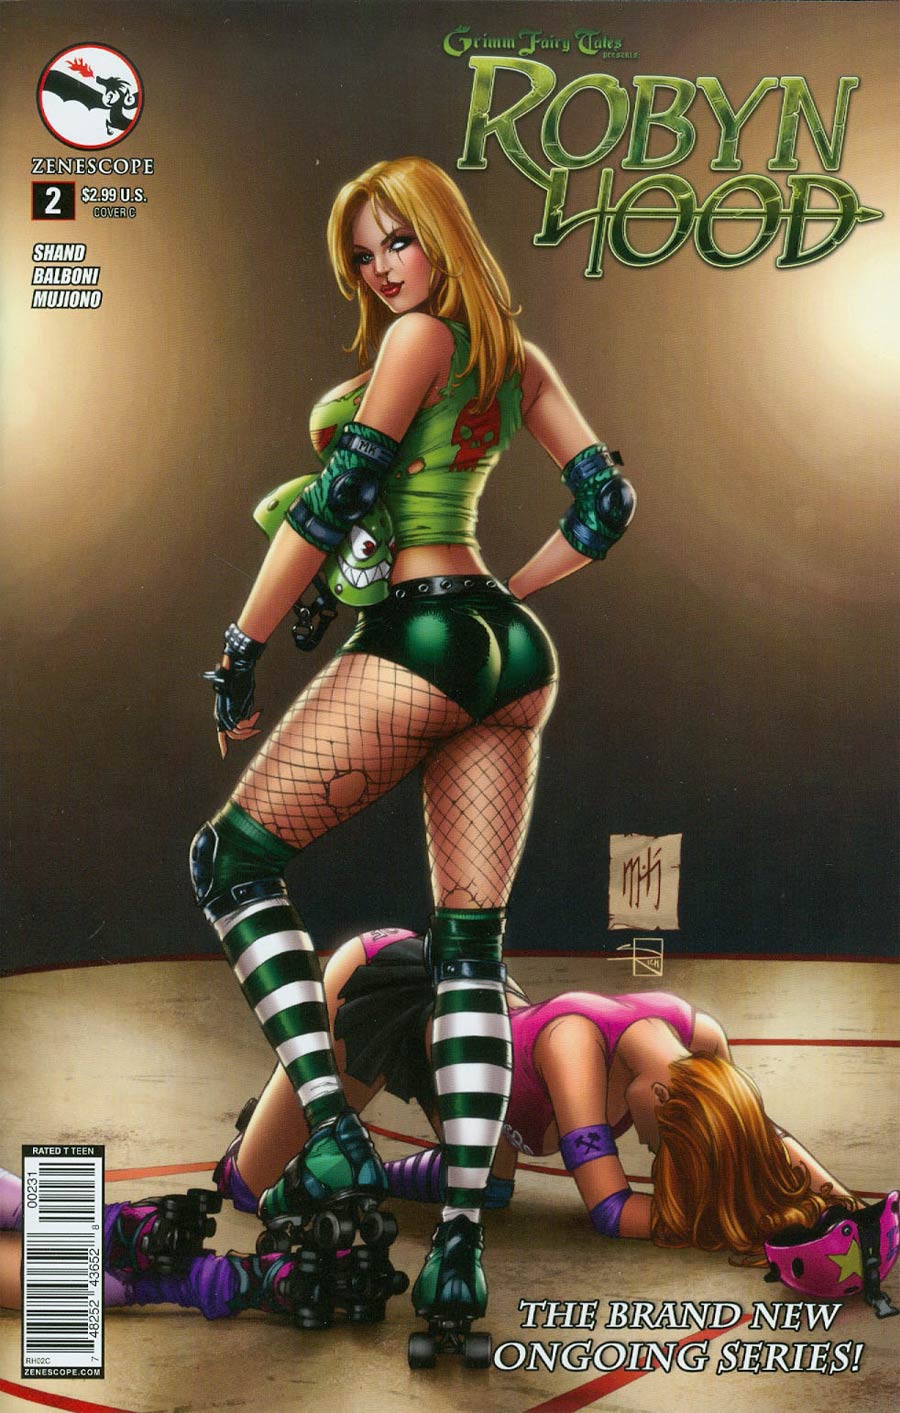 Grimm Fairy Tales Presents Robyn Hood Vol 2 #2 Cover C Mike Krome